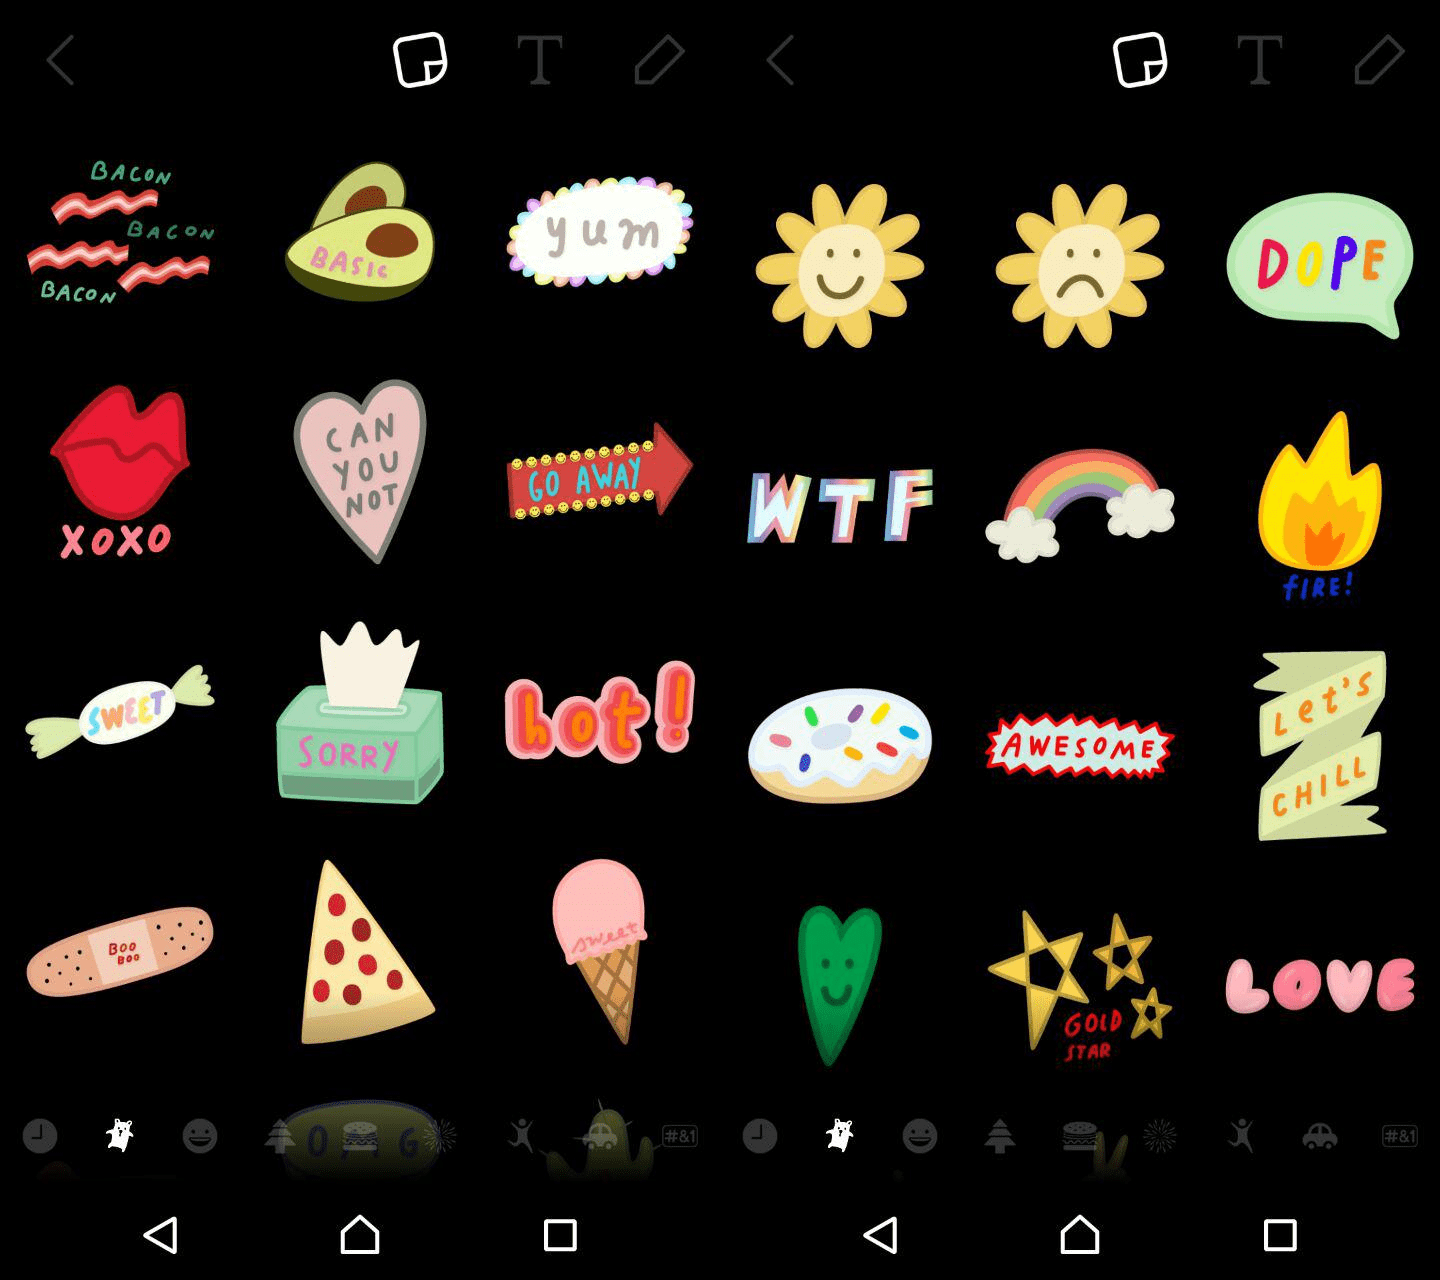 ik heb dorst verdamping produceren Snapchat adds a ton of stickers for you to add to your snaps